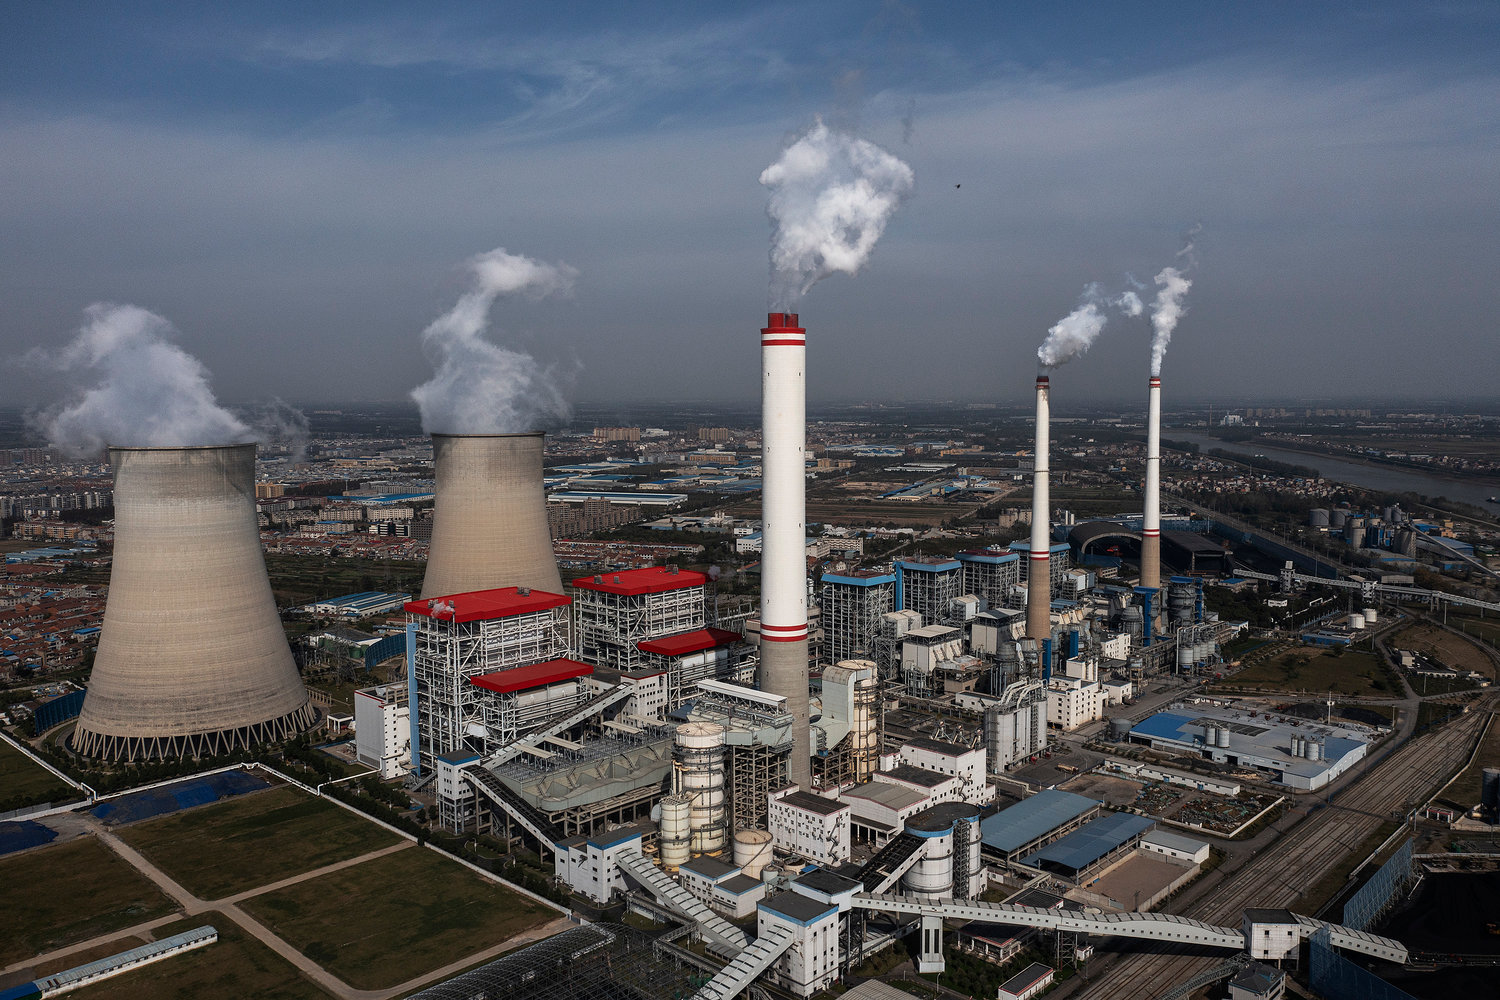 An aerial view of the coal-fired power plant on November 11, 2021, in Hanchuan, Hubei province, China. China and the United States on Wednesday released the China-U.S. Joint Glasgow Declaration on Enhancing Climate Action in the 2020s here at the ongoing COP26 to the United Nations Framework Convention on Climate Change.his is the 26th "Conference of the Parties" and represents a gathering of all the countries signed on to the U.N. Framework Convention on Climate Change and the Paris Climate Agreement. The aim of this year's conference is to commit countries to net-zero carbon emissions by 2050. (Getty Images/TNS)